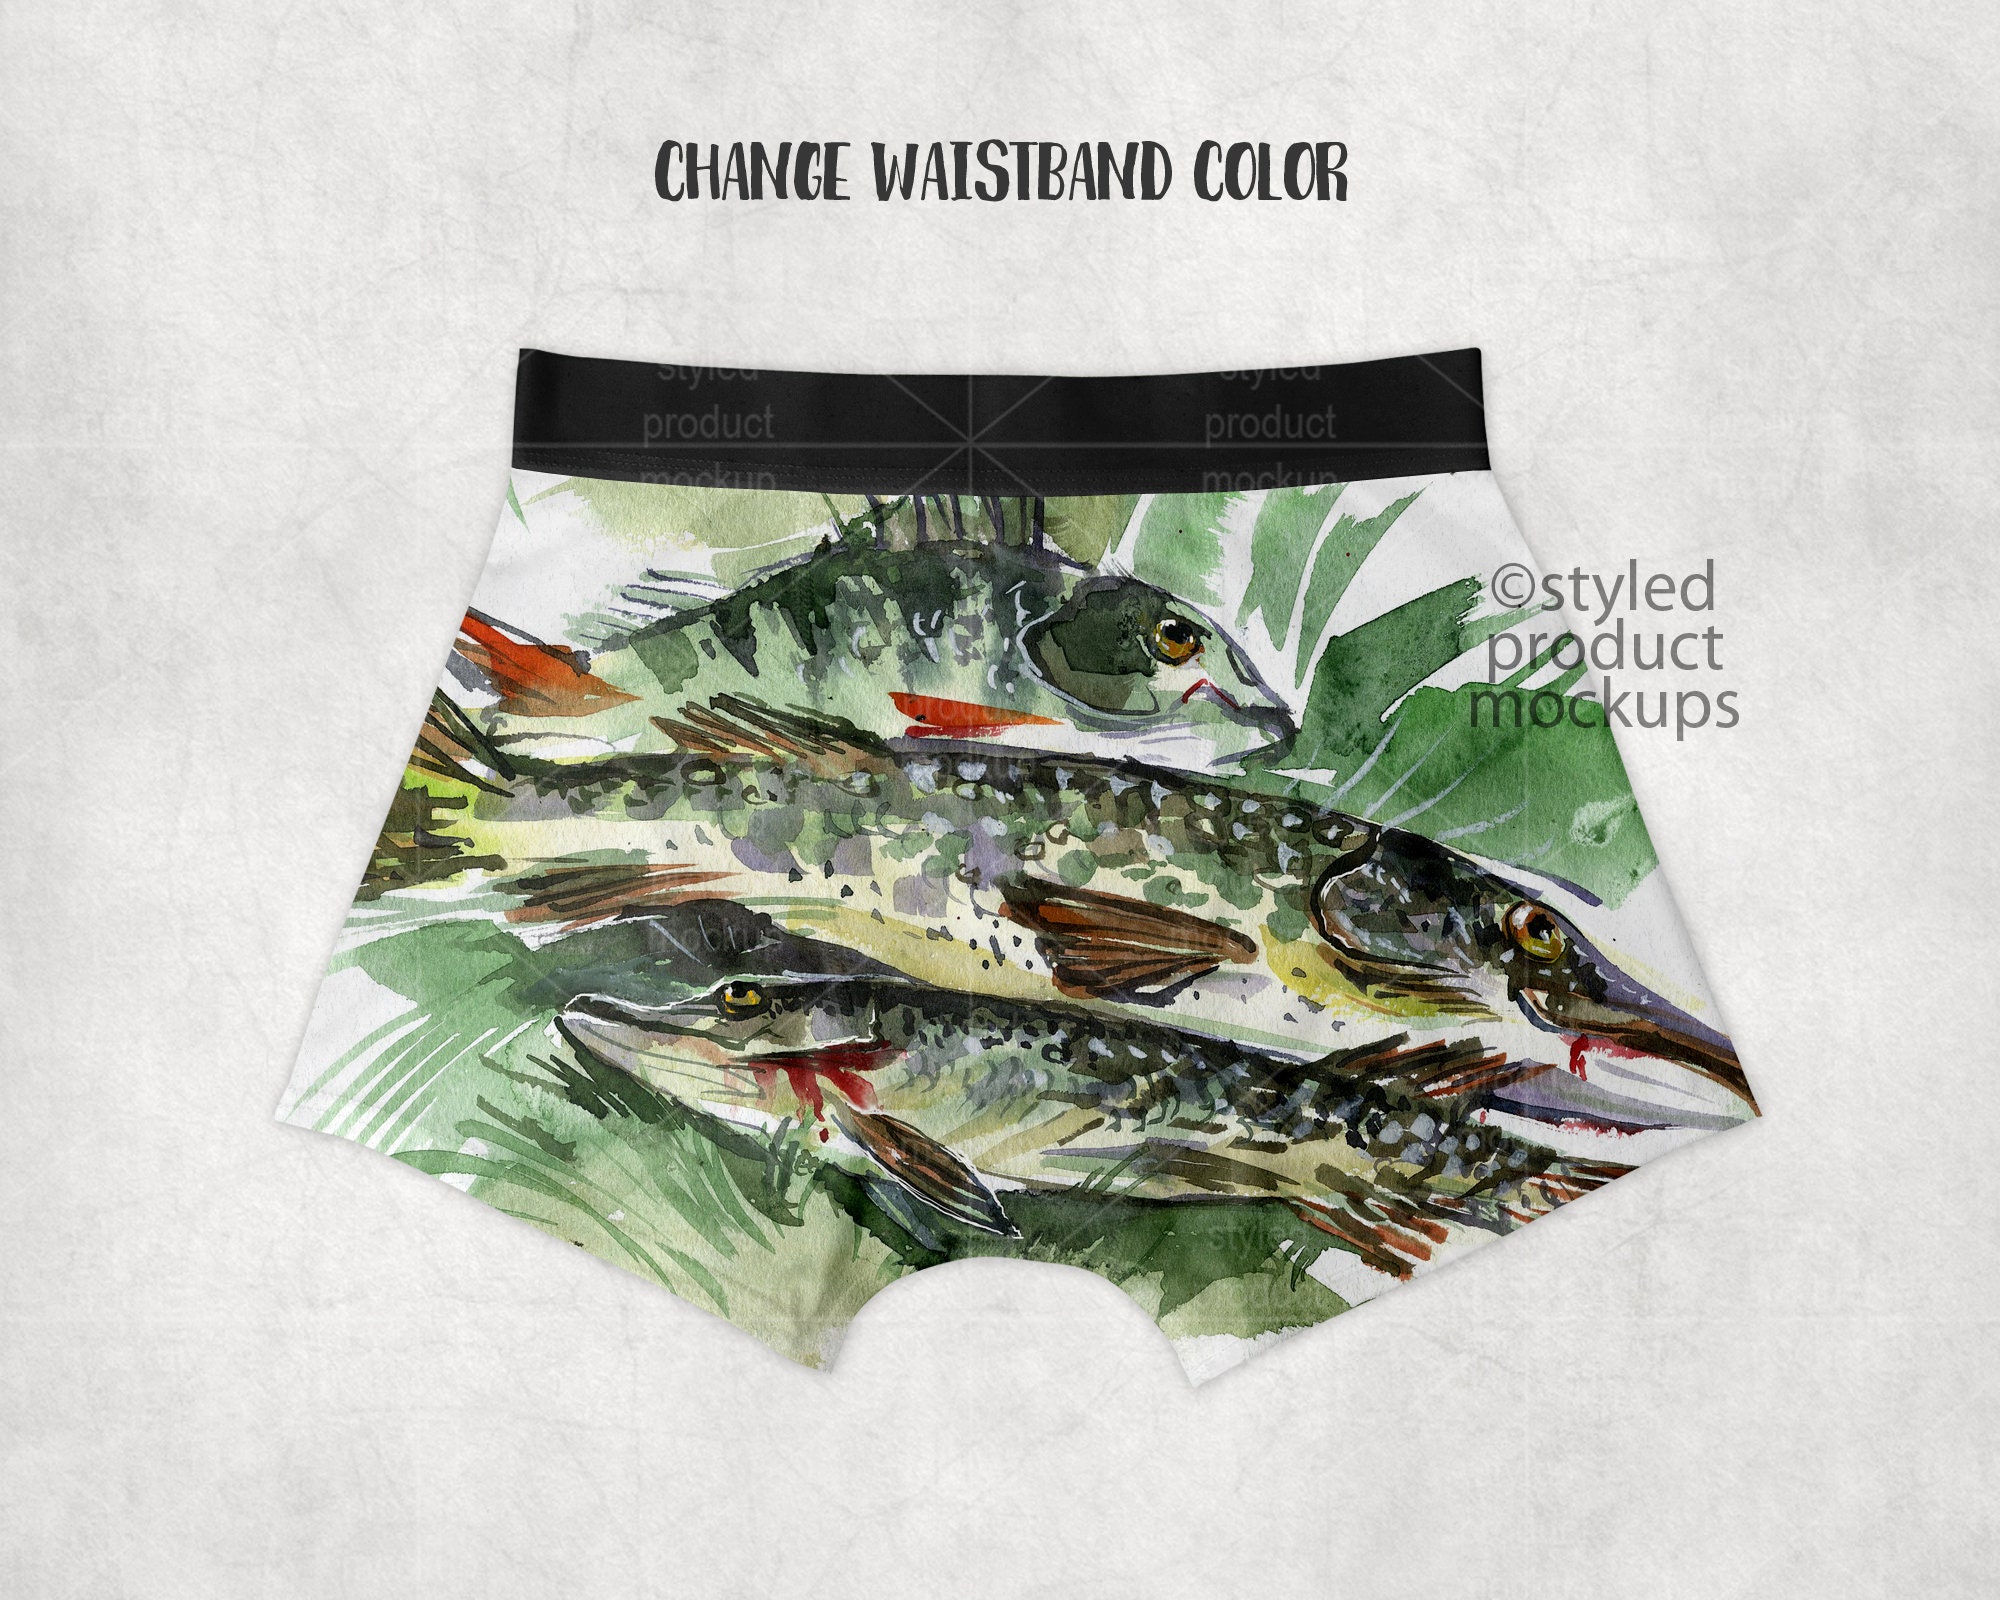 Dye Sublimation Adult Men's Boxers Mockup Add Your Own Image and